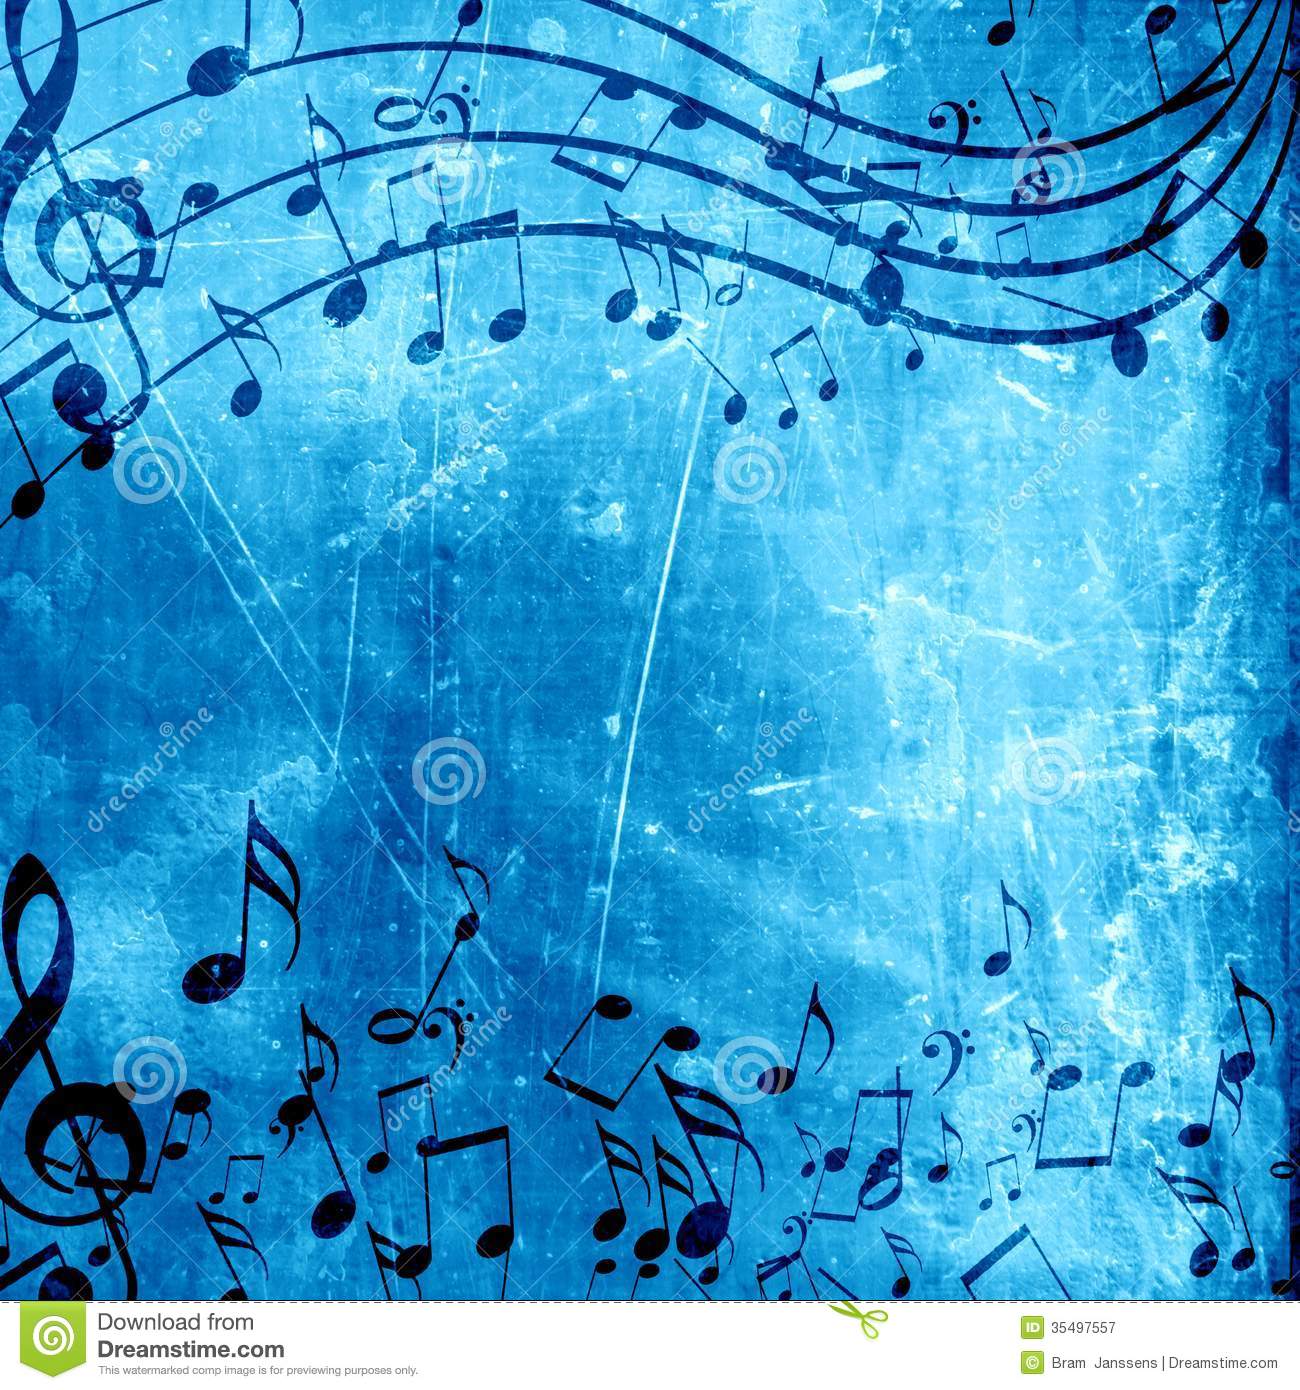 Awesome Music Note Background Displaying Image For